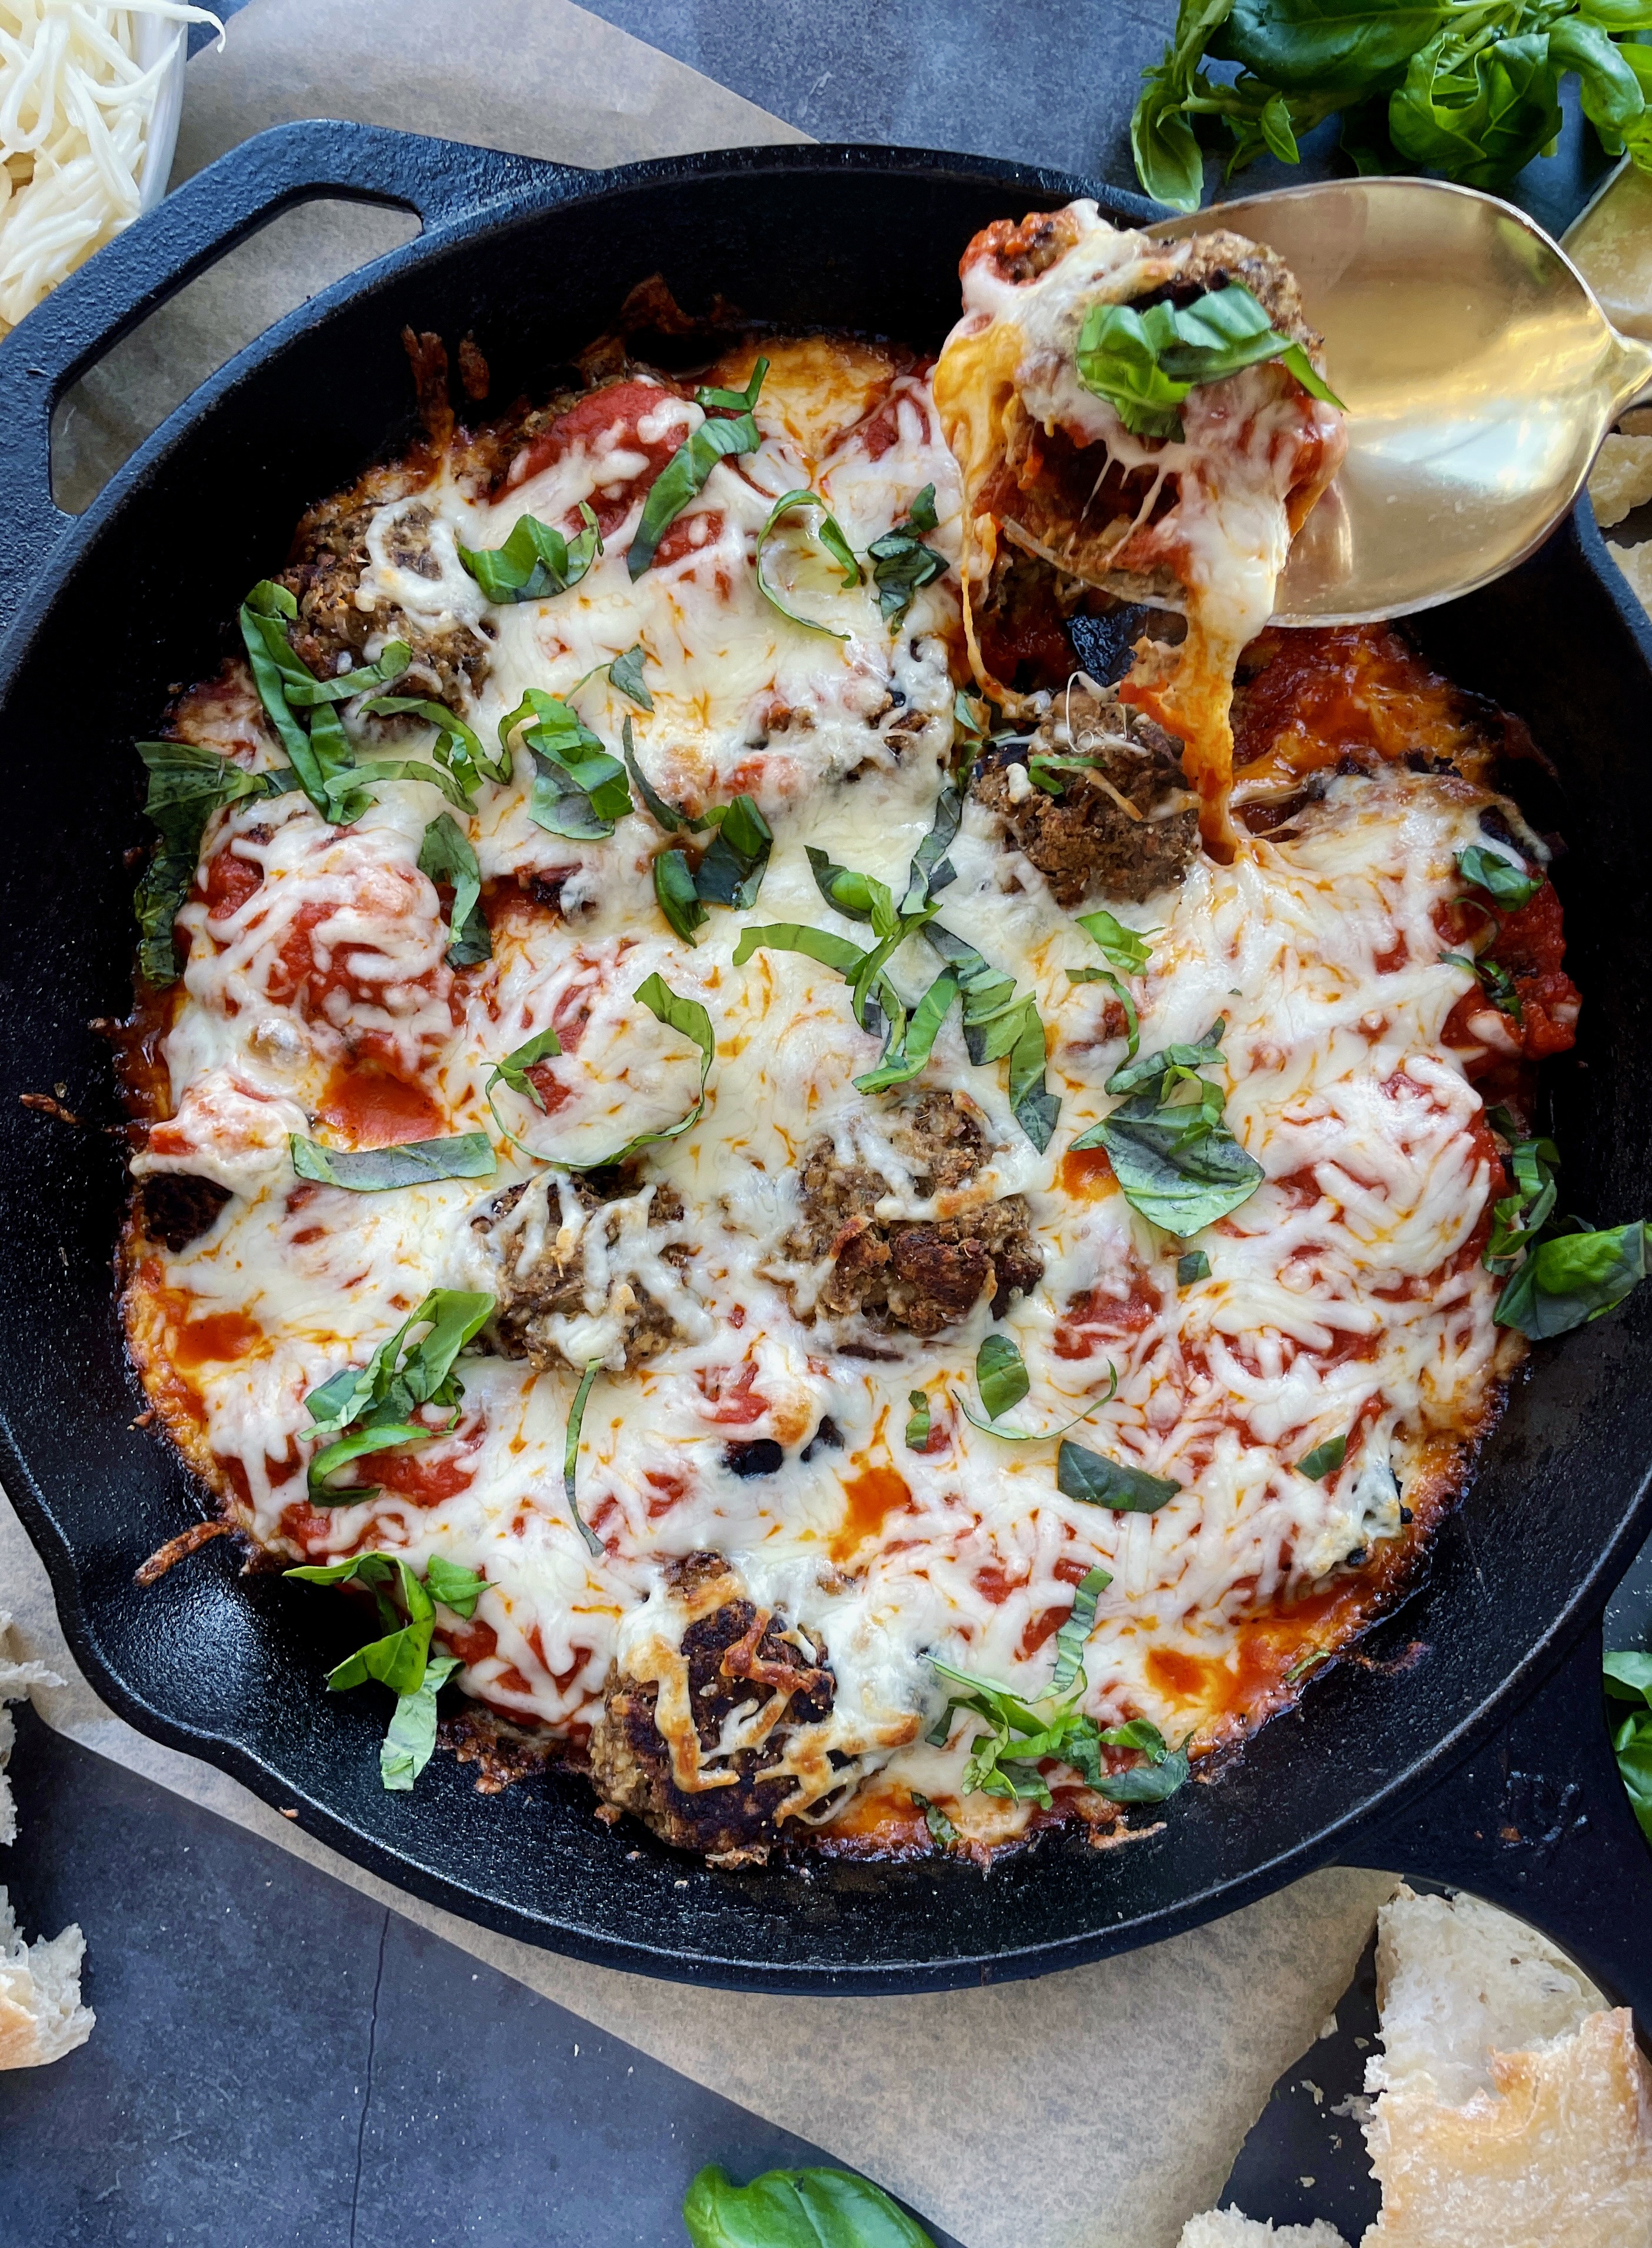 Lightly seared, veggie-filled, and protein-packed vegetarian meatballs baked off in marinara and all the cheese: this Cheesy Lentil Vegetarian "Meatball" Skillet is my favorite meatless weeknight dinner!